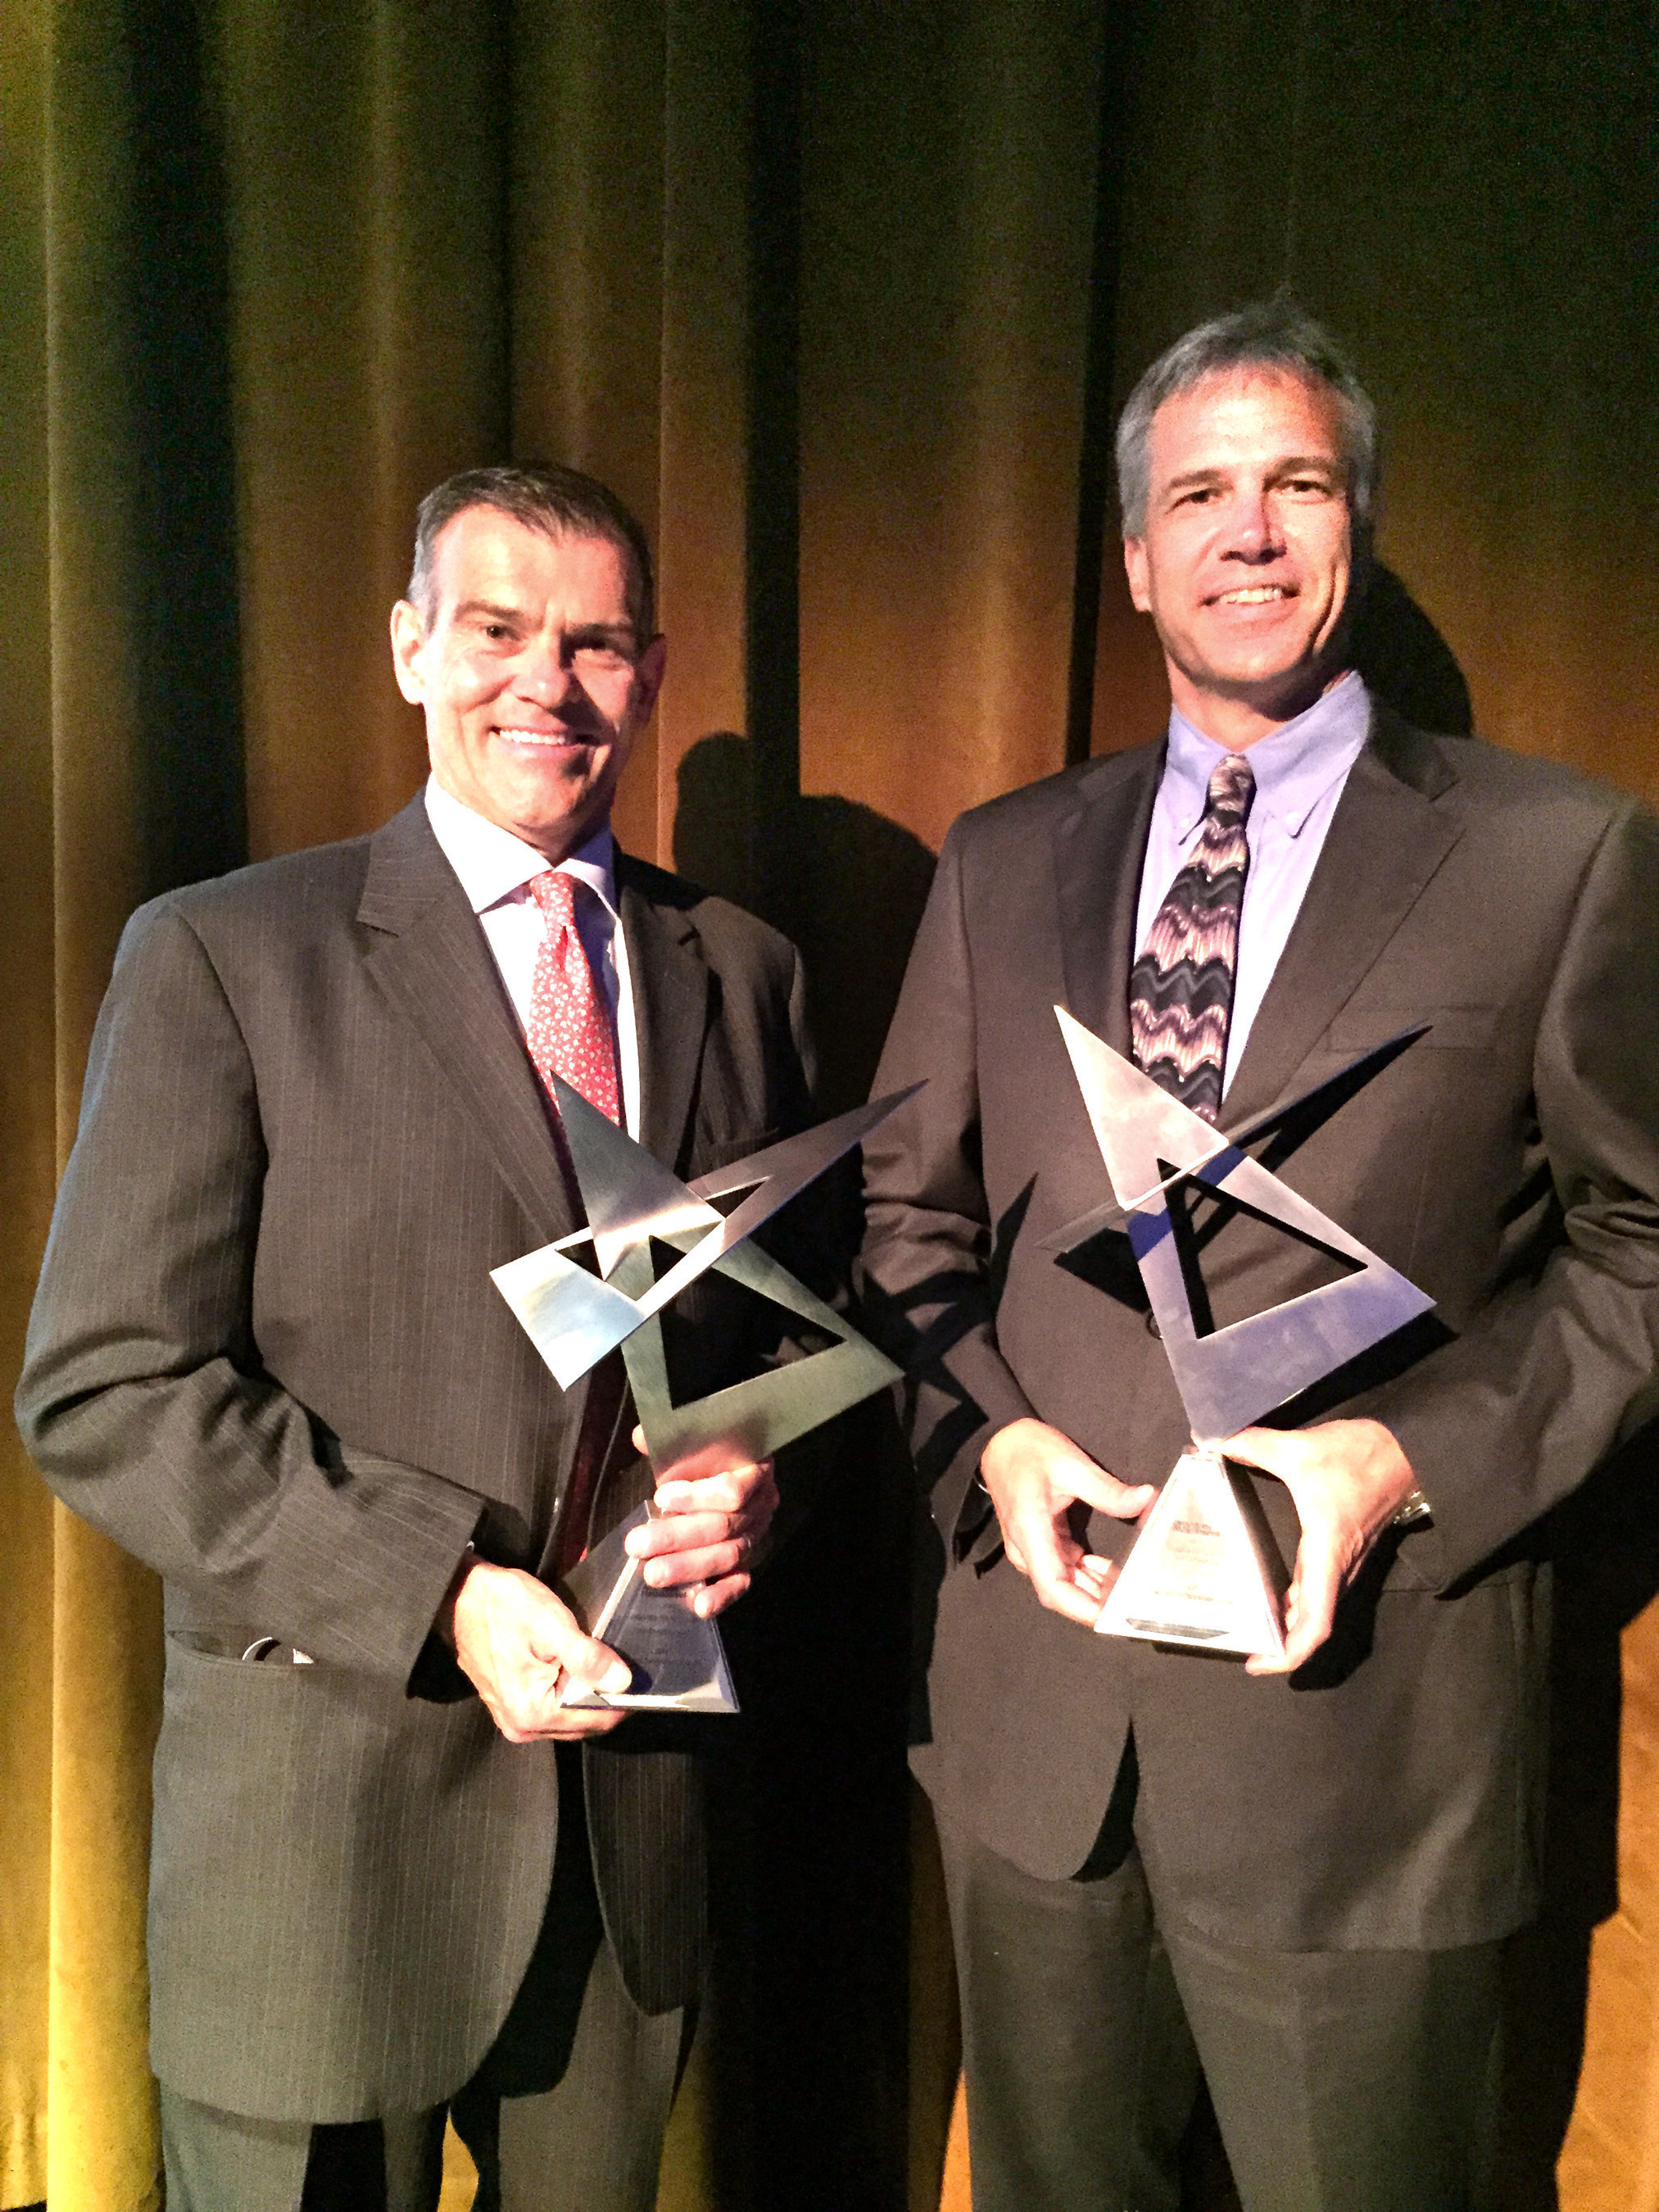 John Coll, vice president of sales and marketing and Peter Campo, president, accept AMM awards on behalf of Gerdau Long Steel North America.